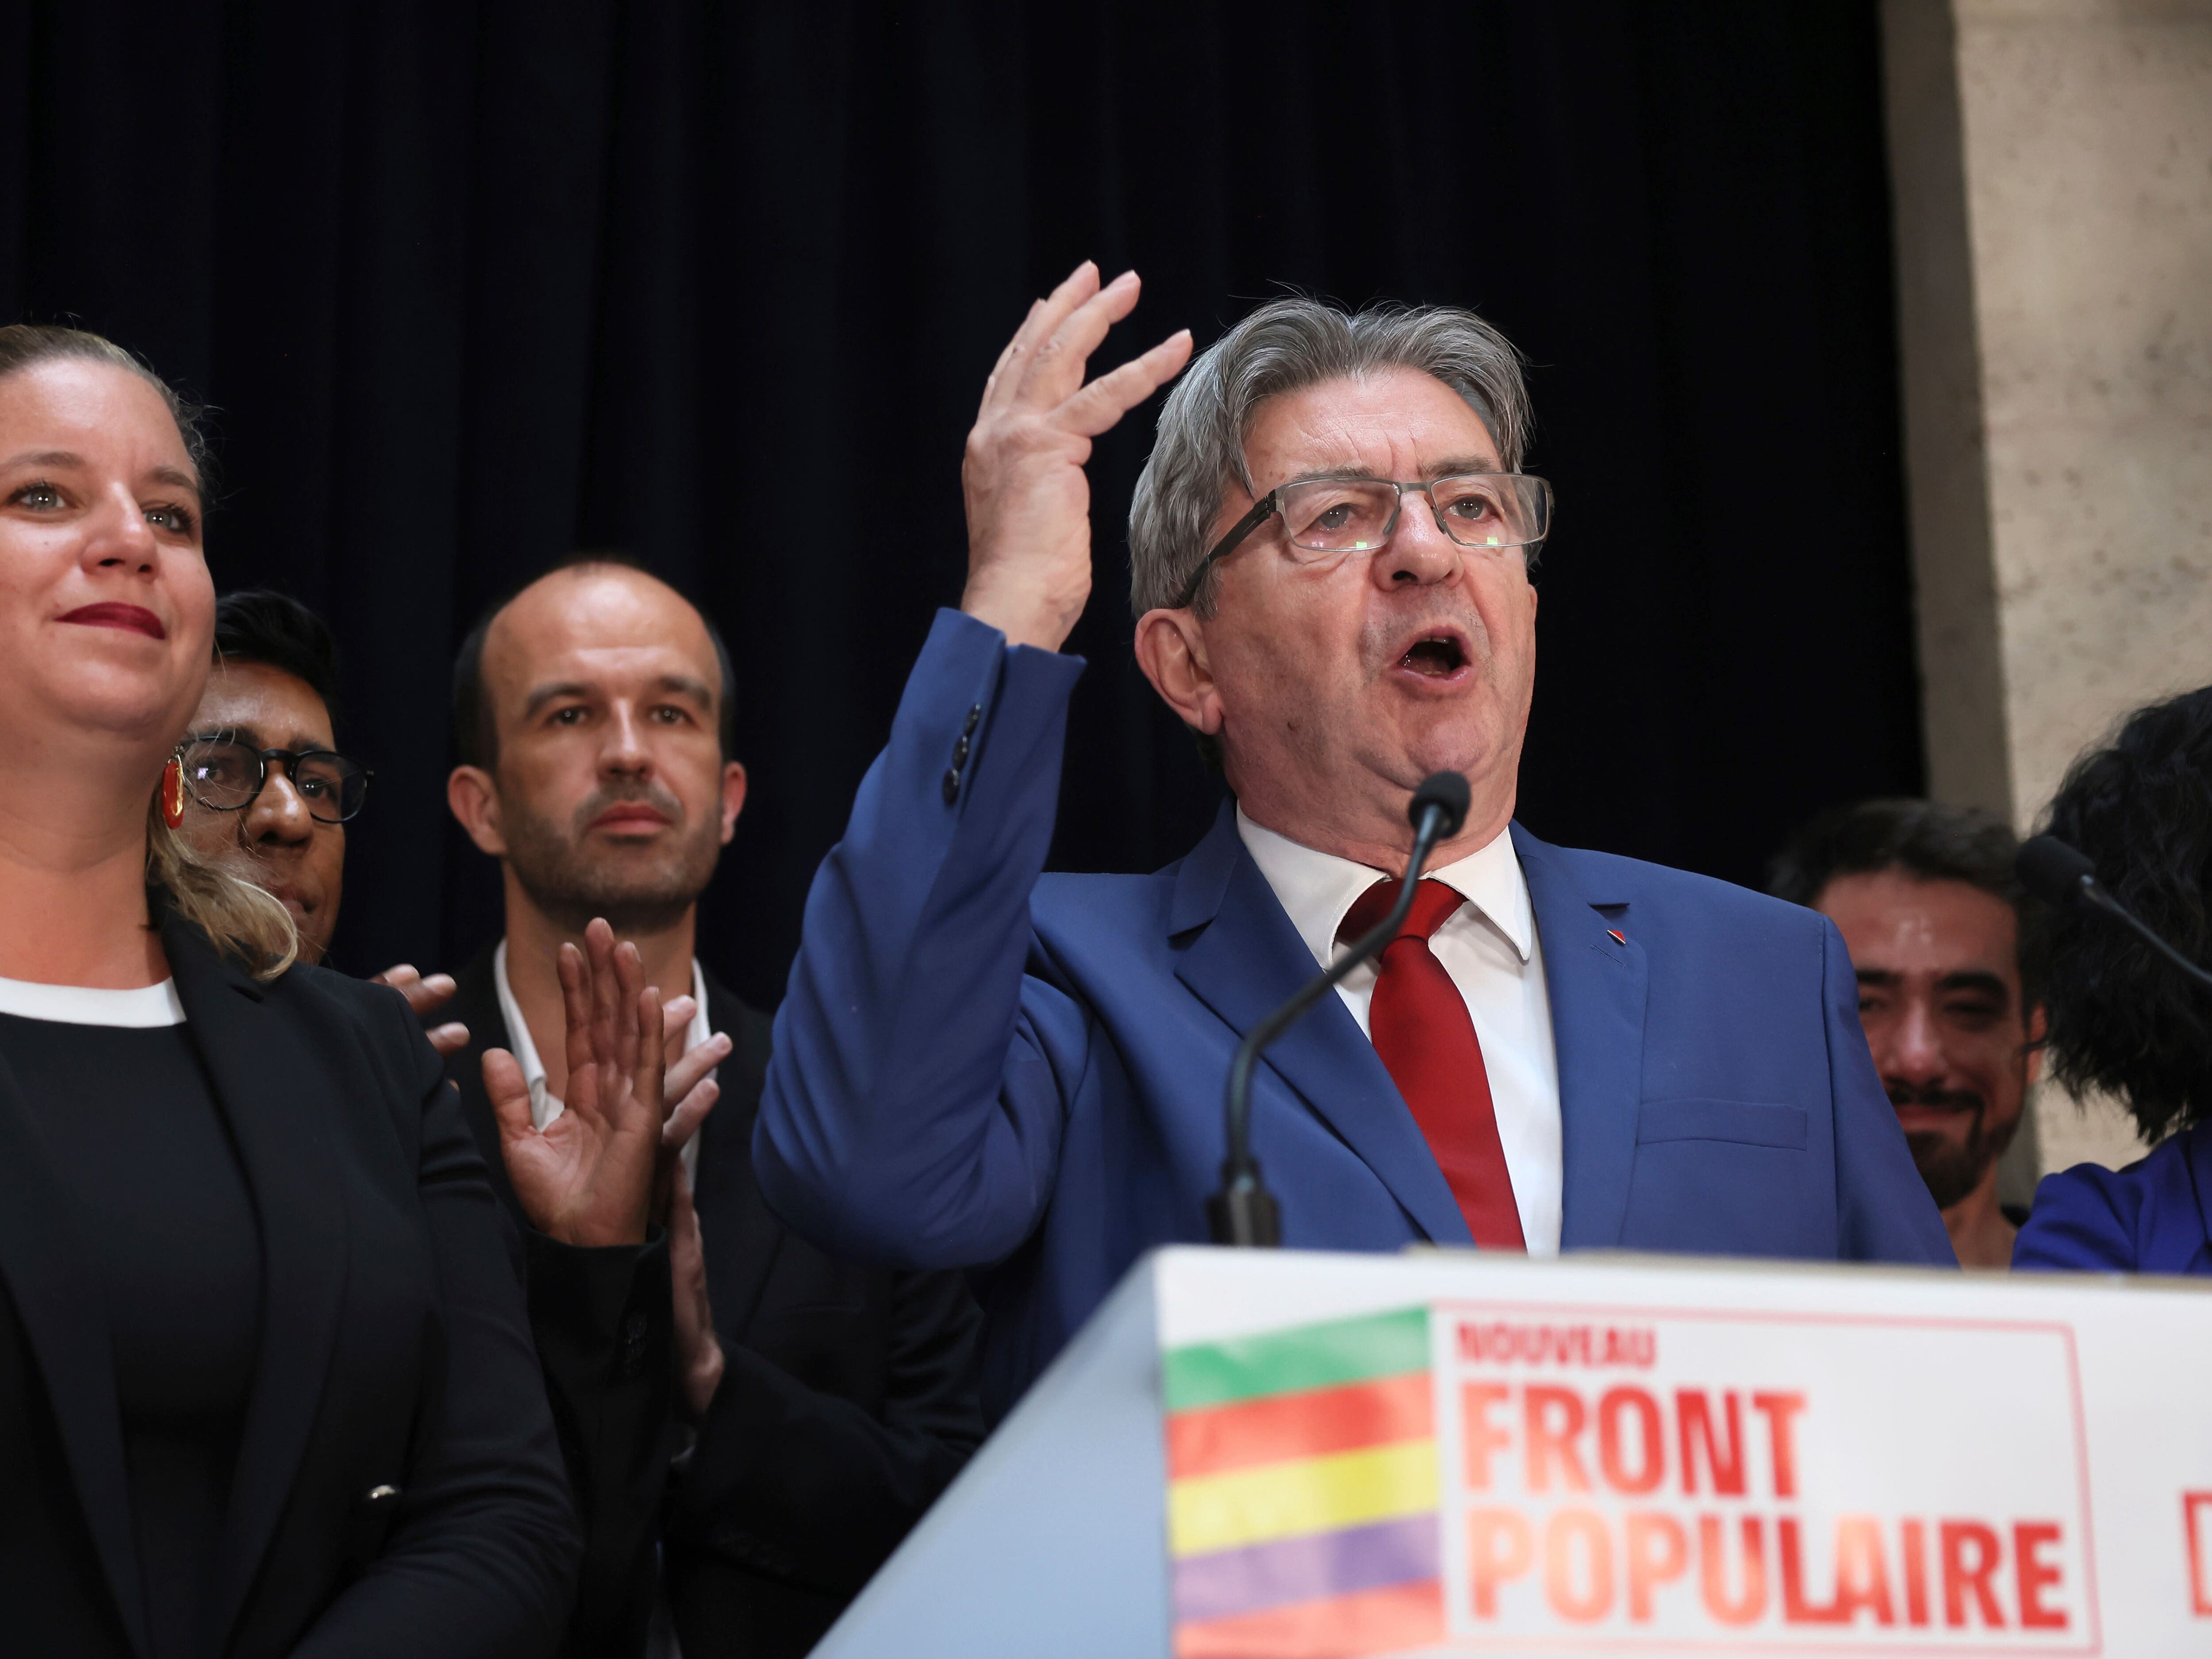 Leftist coalition wins most seats in French elections, pollsters say